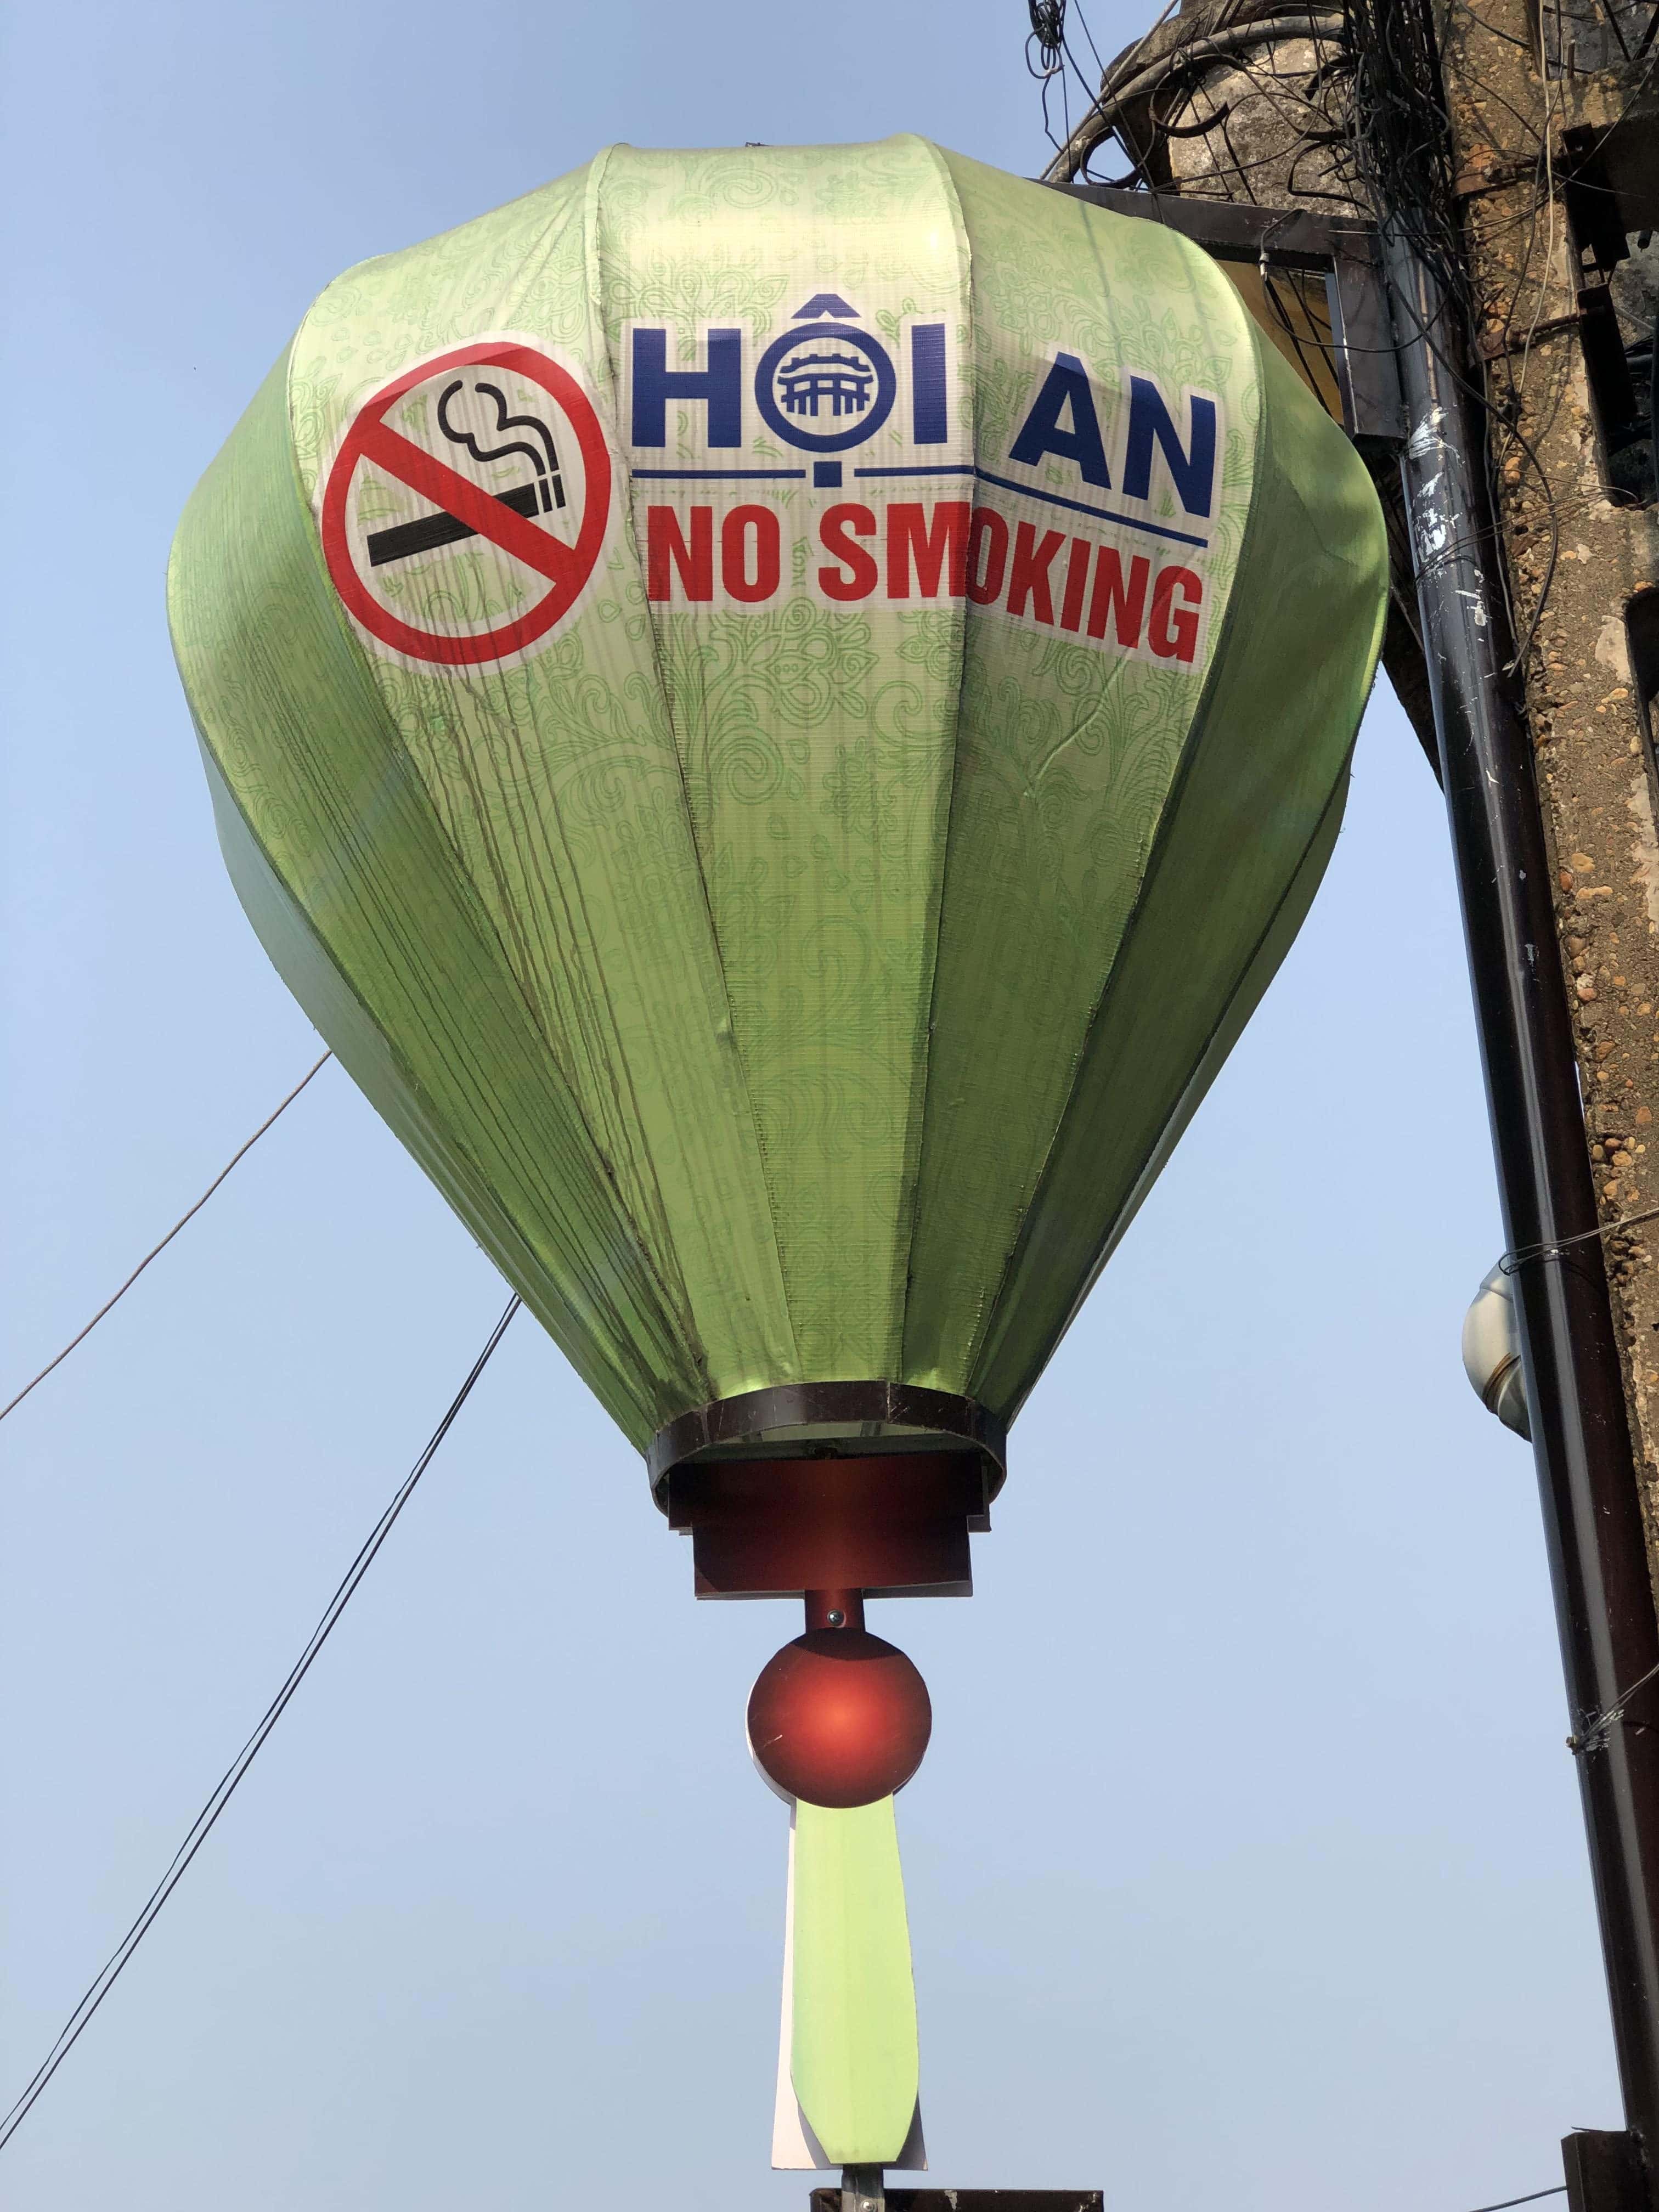 Yes! No smoking in Hoi An